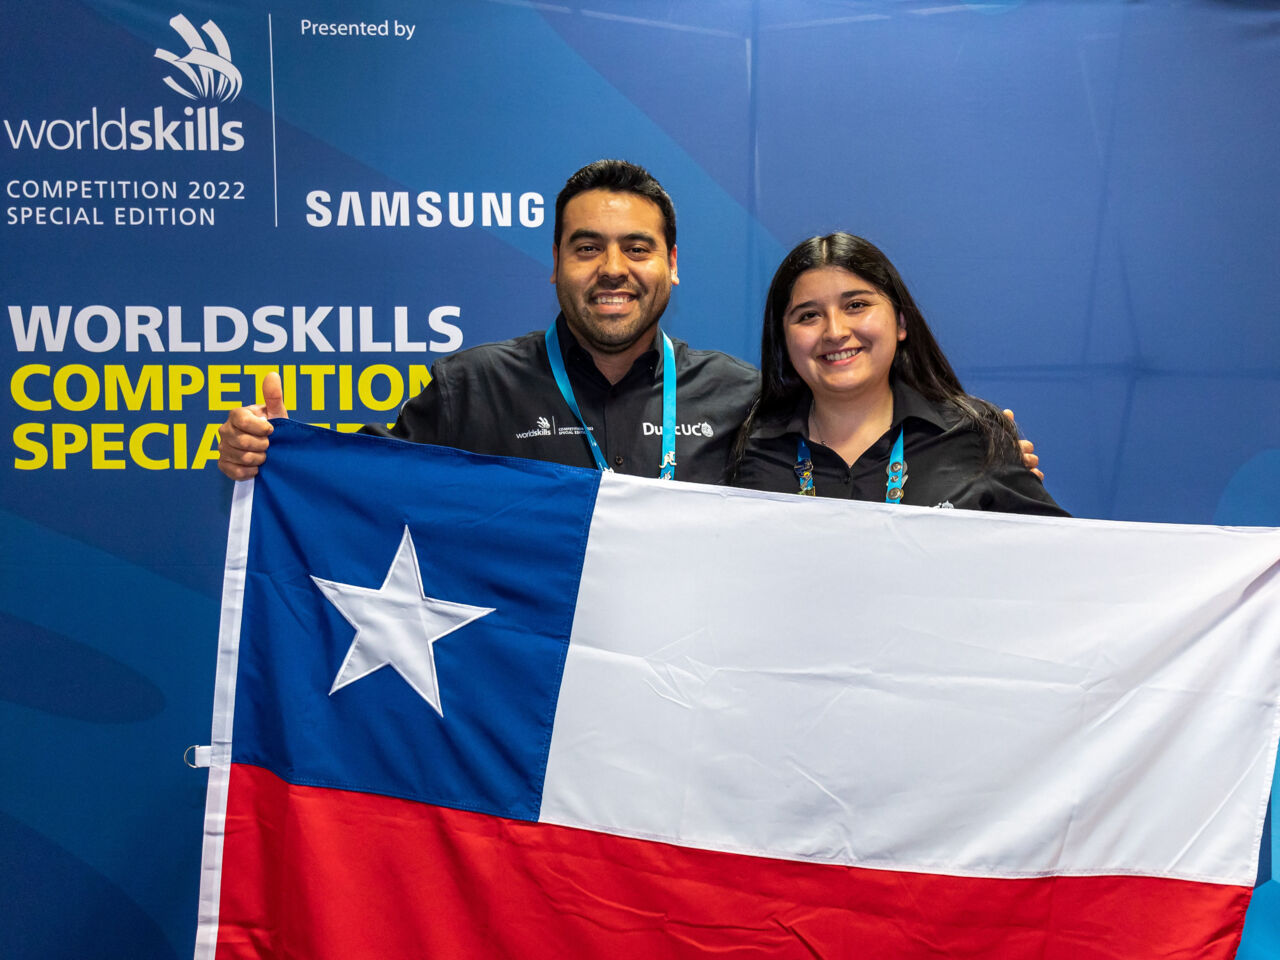 María Belén Almonacid Barros, the first Chilean female Competitor in the Automotive Technology, stands with her country's flag at WorldSkills Competition 2022 Special Edition.